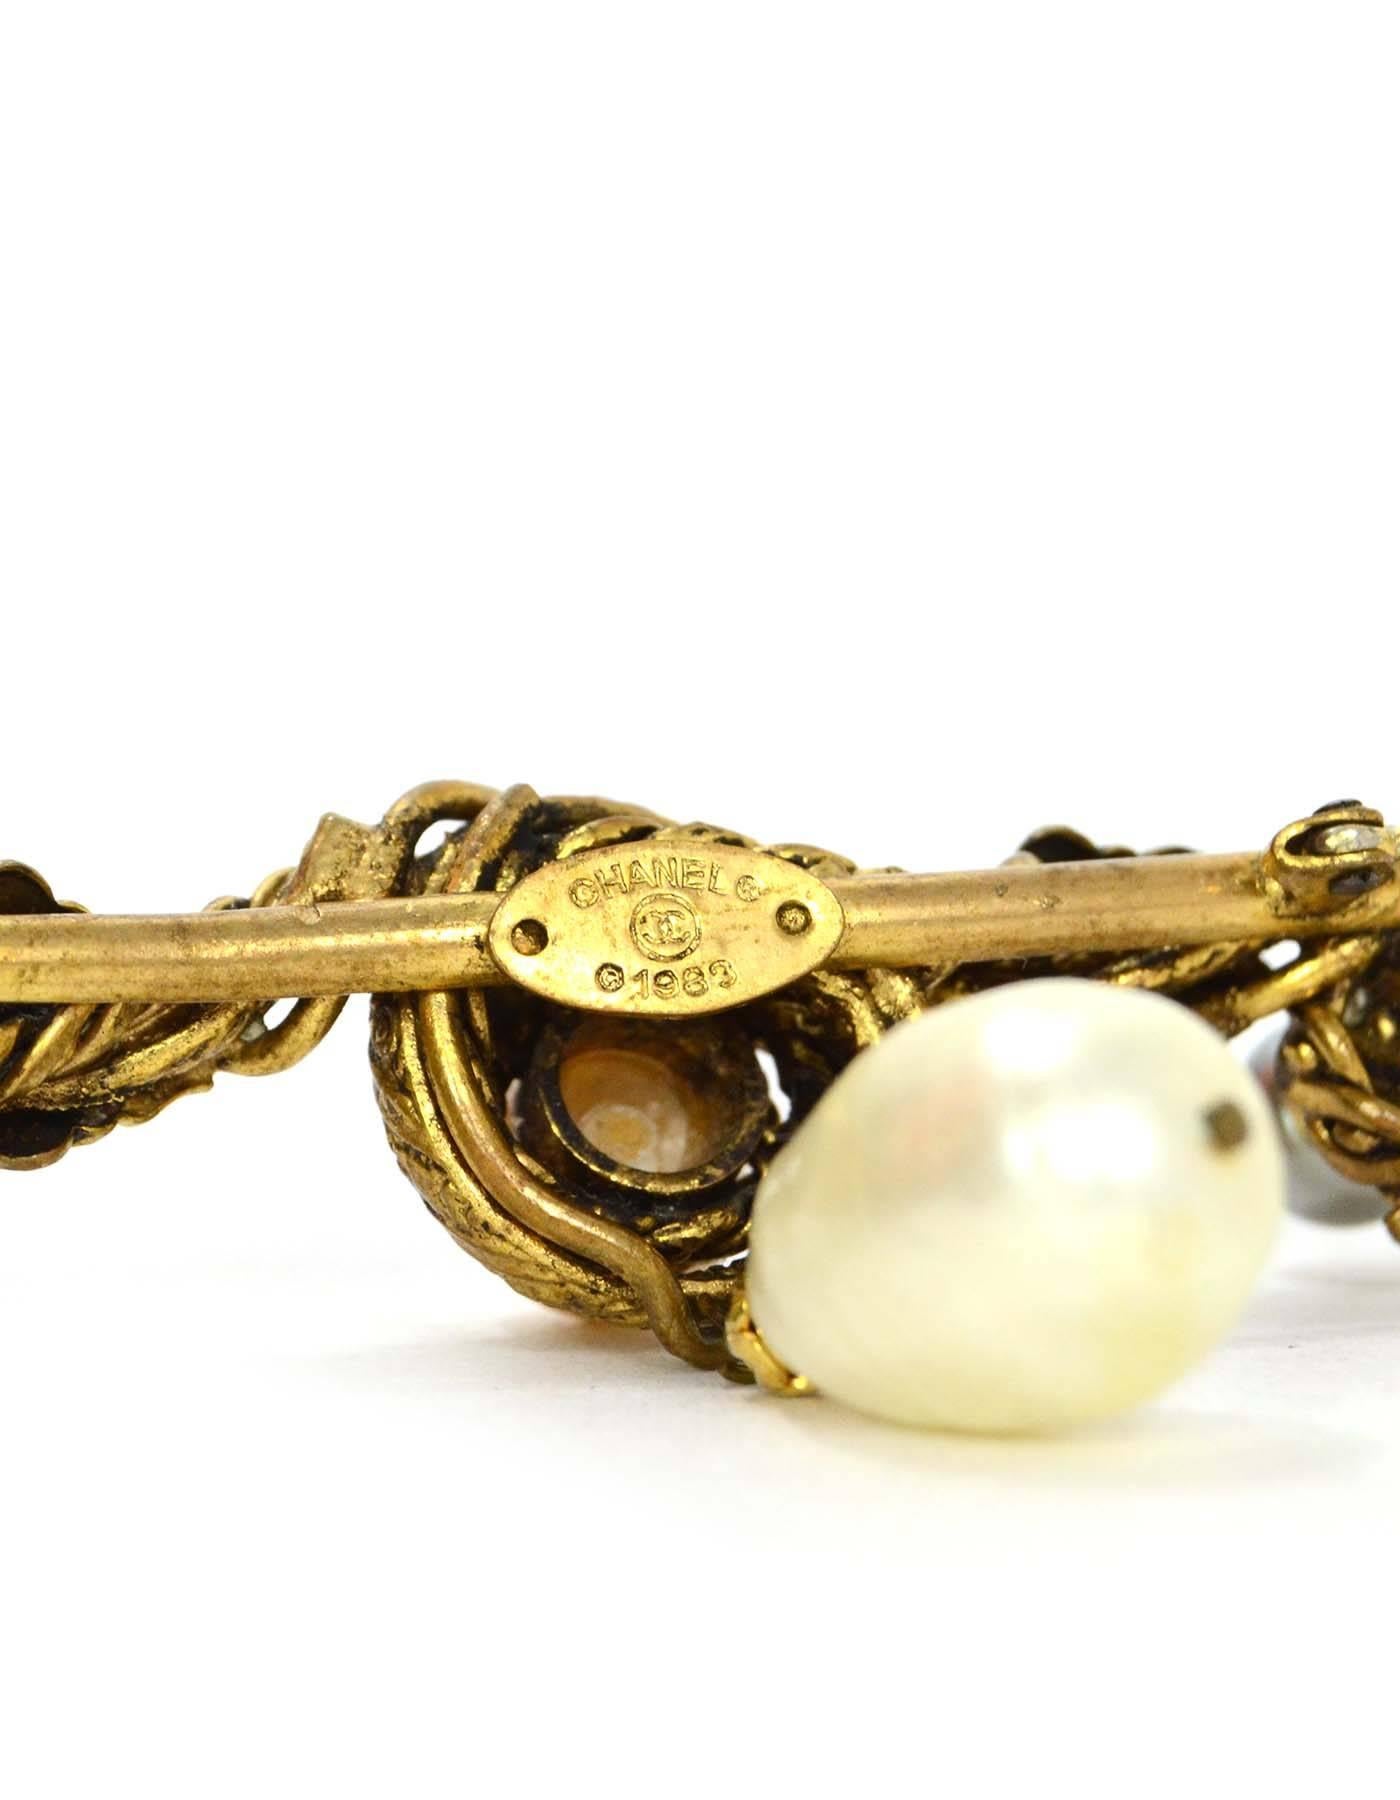 Chanel Vintage '83 Gold Leaf & Pearl Brooch
Features one tear drop faux pearl

Made In: France
Year of Production: 1983
Color: Goldtone, ivory and grey
Materials: Metal and faux pearl
Closure: Pin back closure
Stamp: Chanel CC 1983
Overall